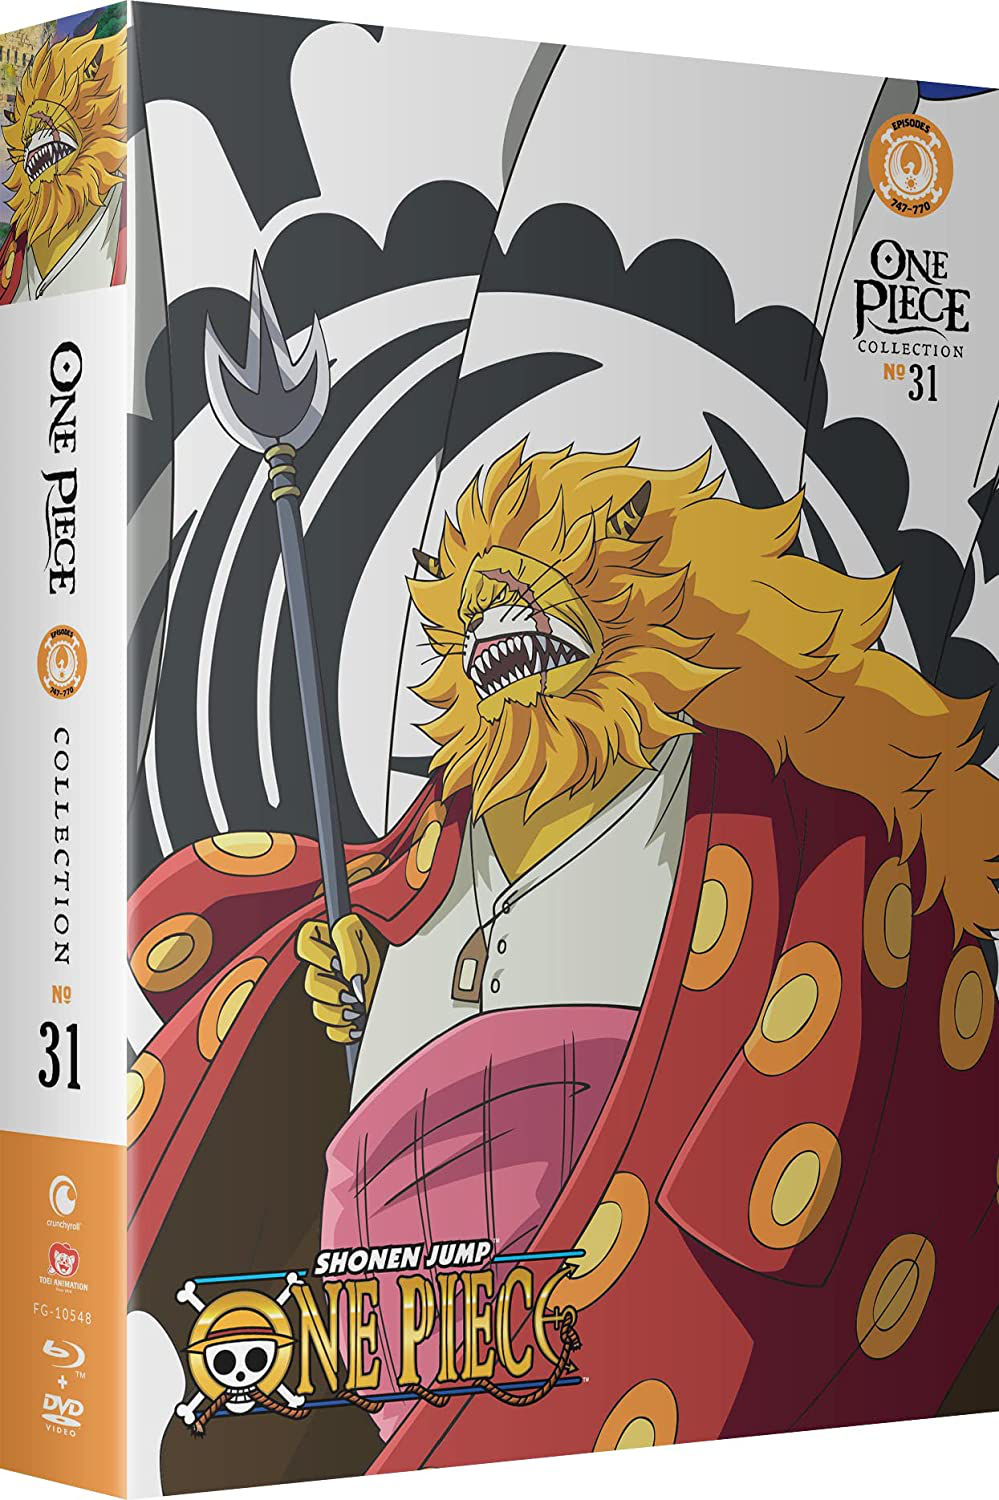 One Piece Collection 30 Blu-ray/DVD